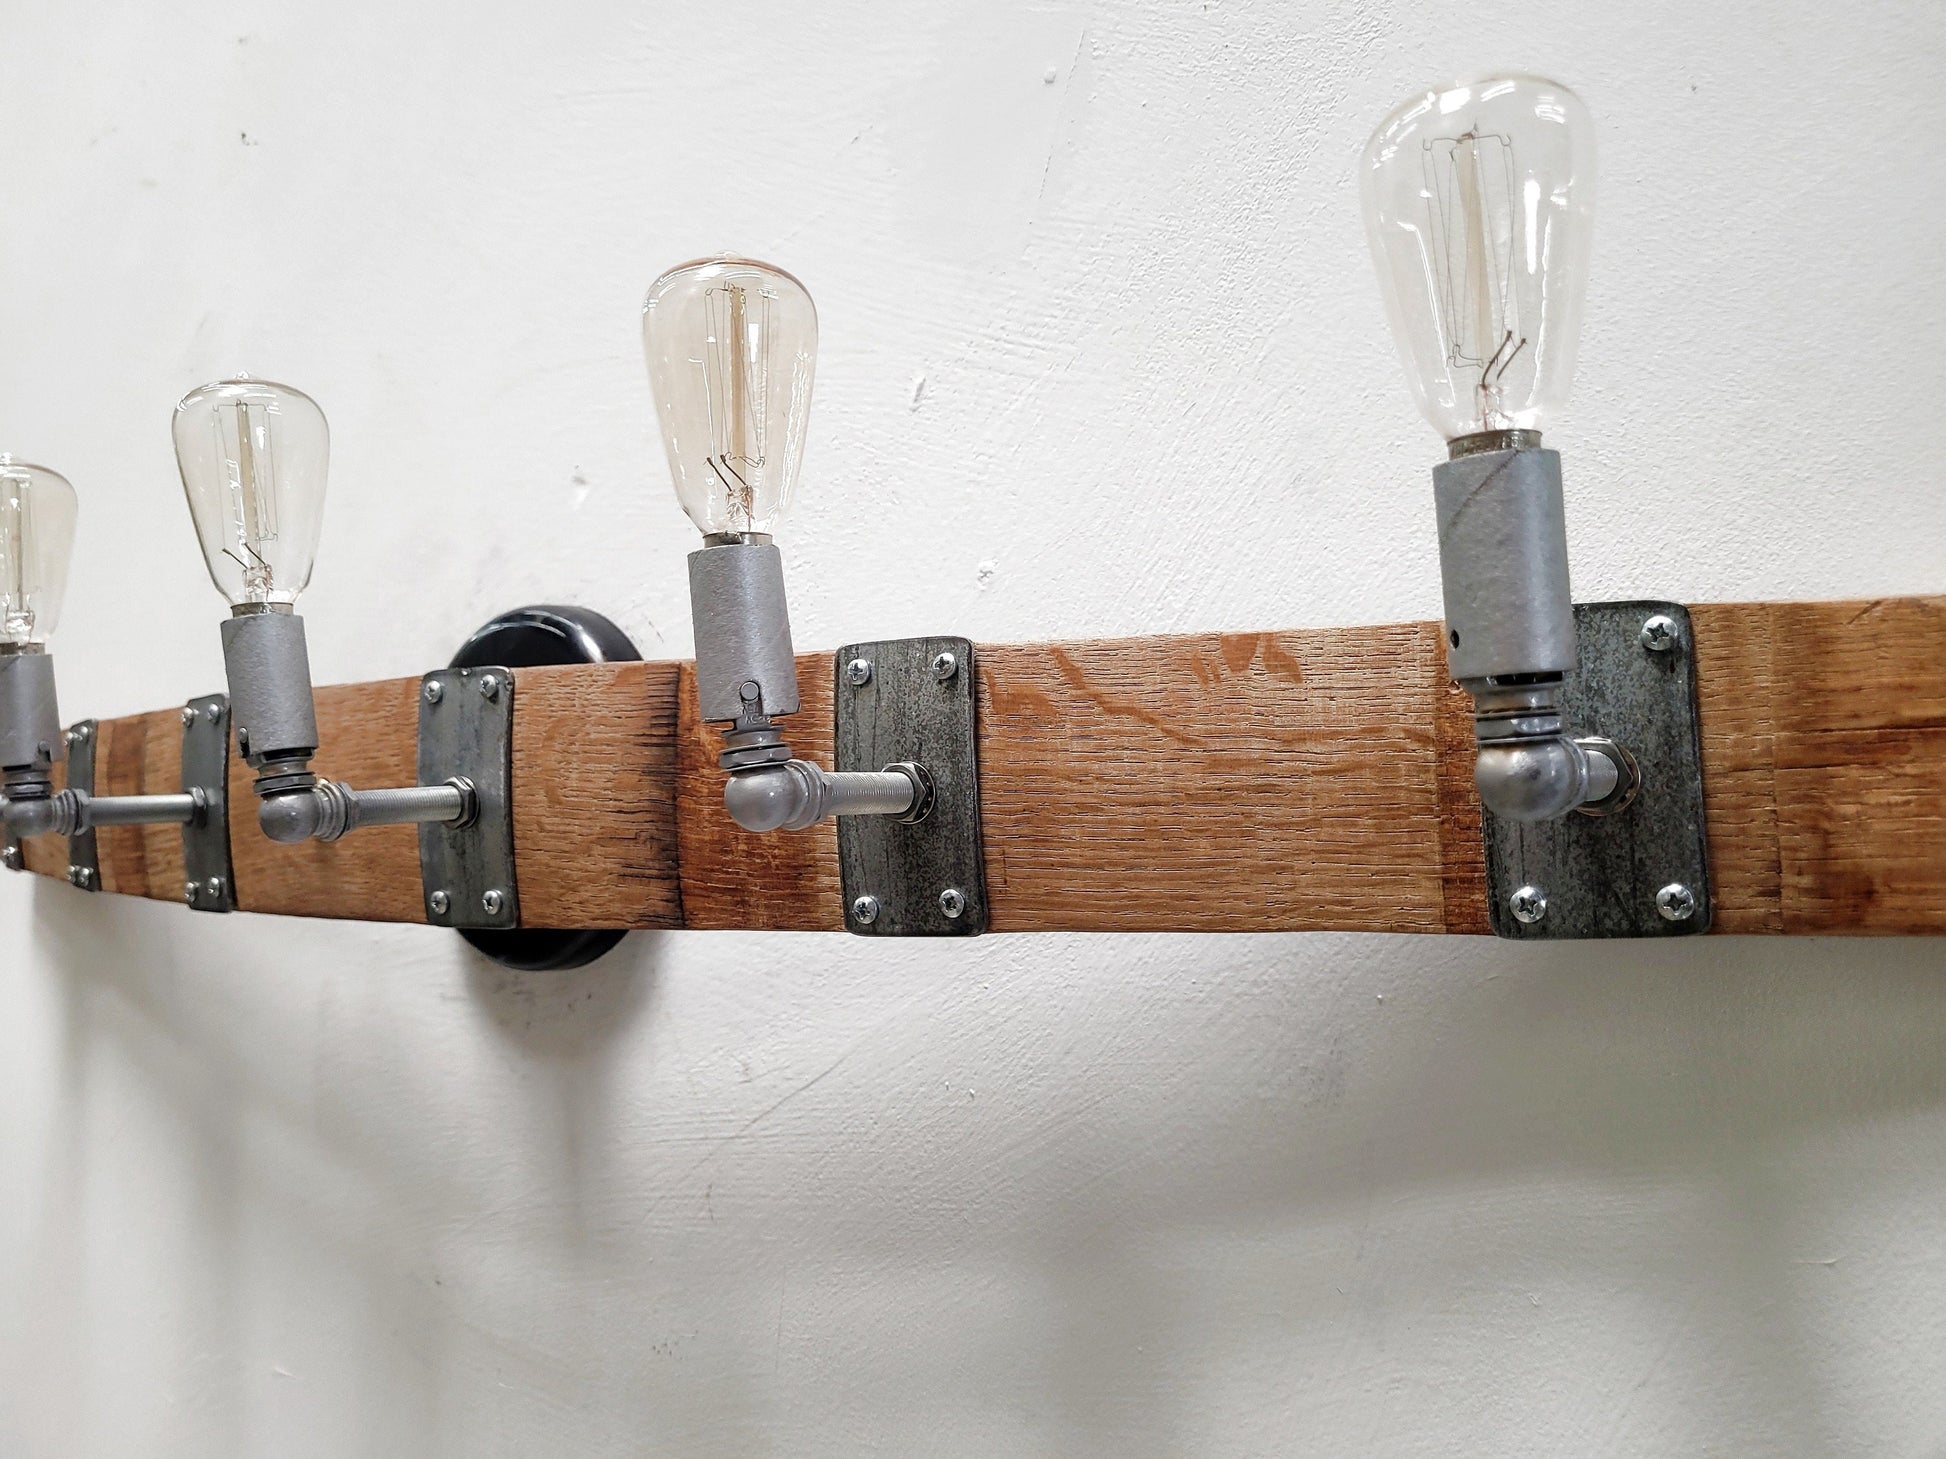 Wine Barrel Wall Sconce Vanity Light - Doellat - made from retired California wine barrels. 100% Recycled!